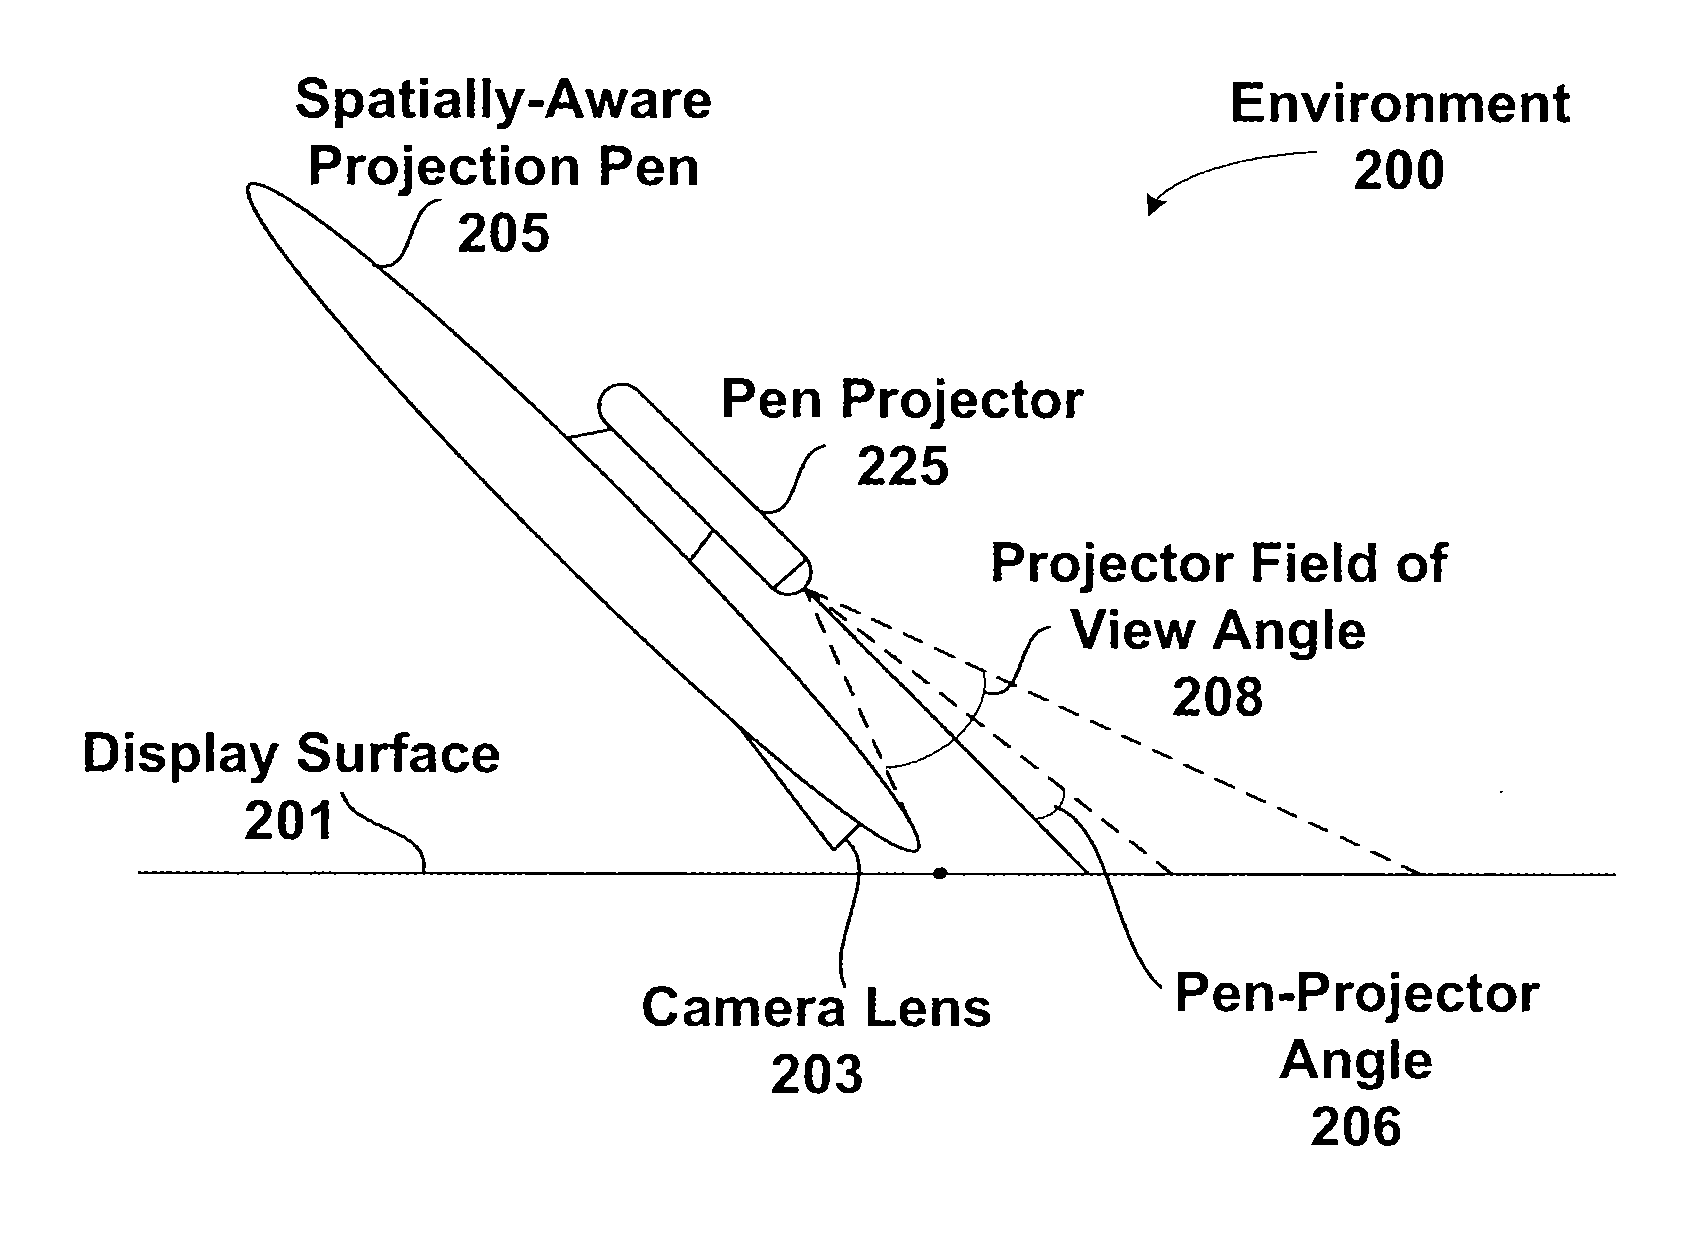 Spatially-aware projection pen display